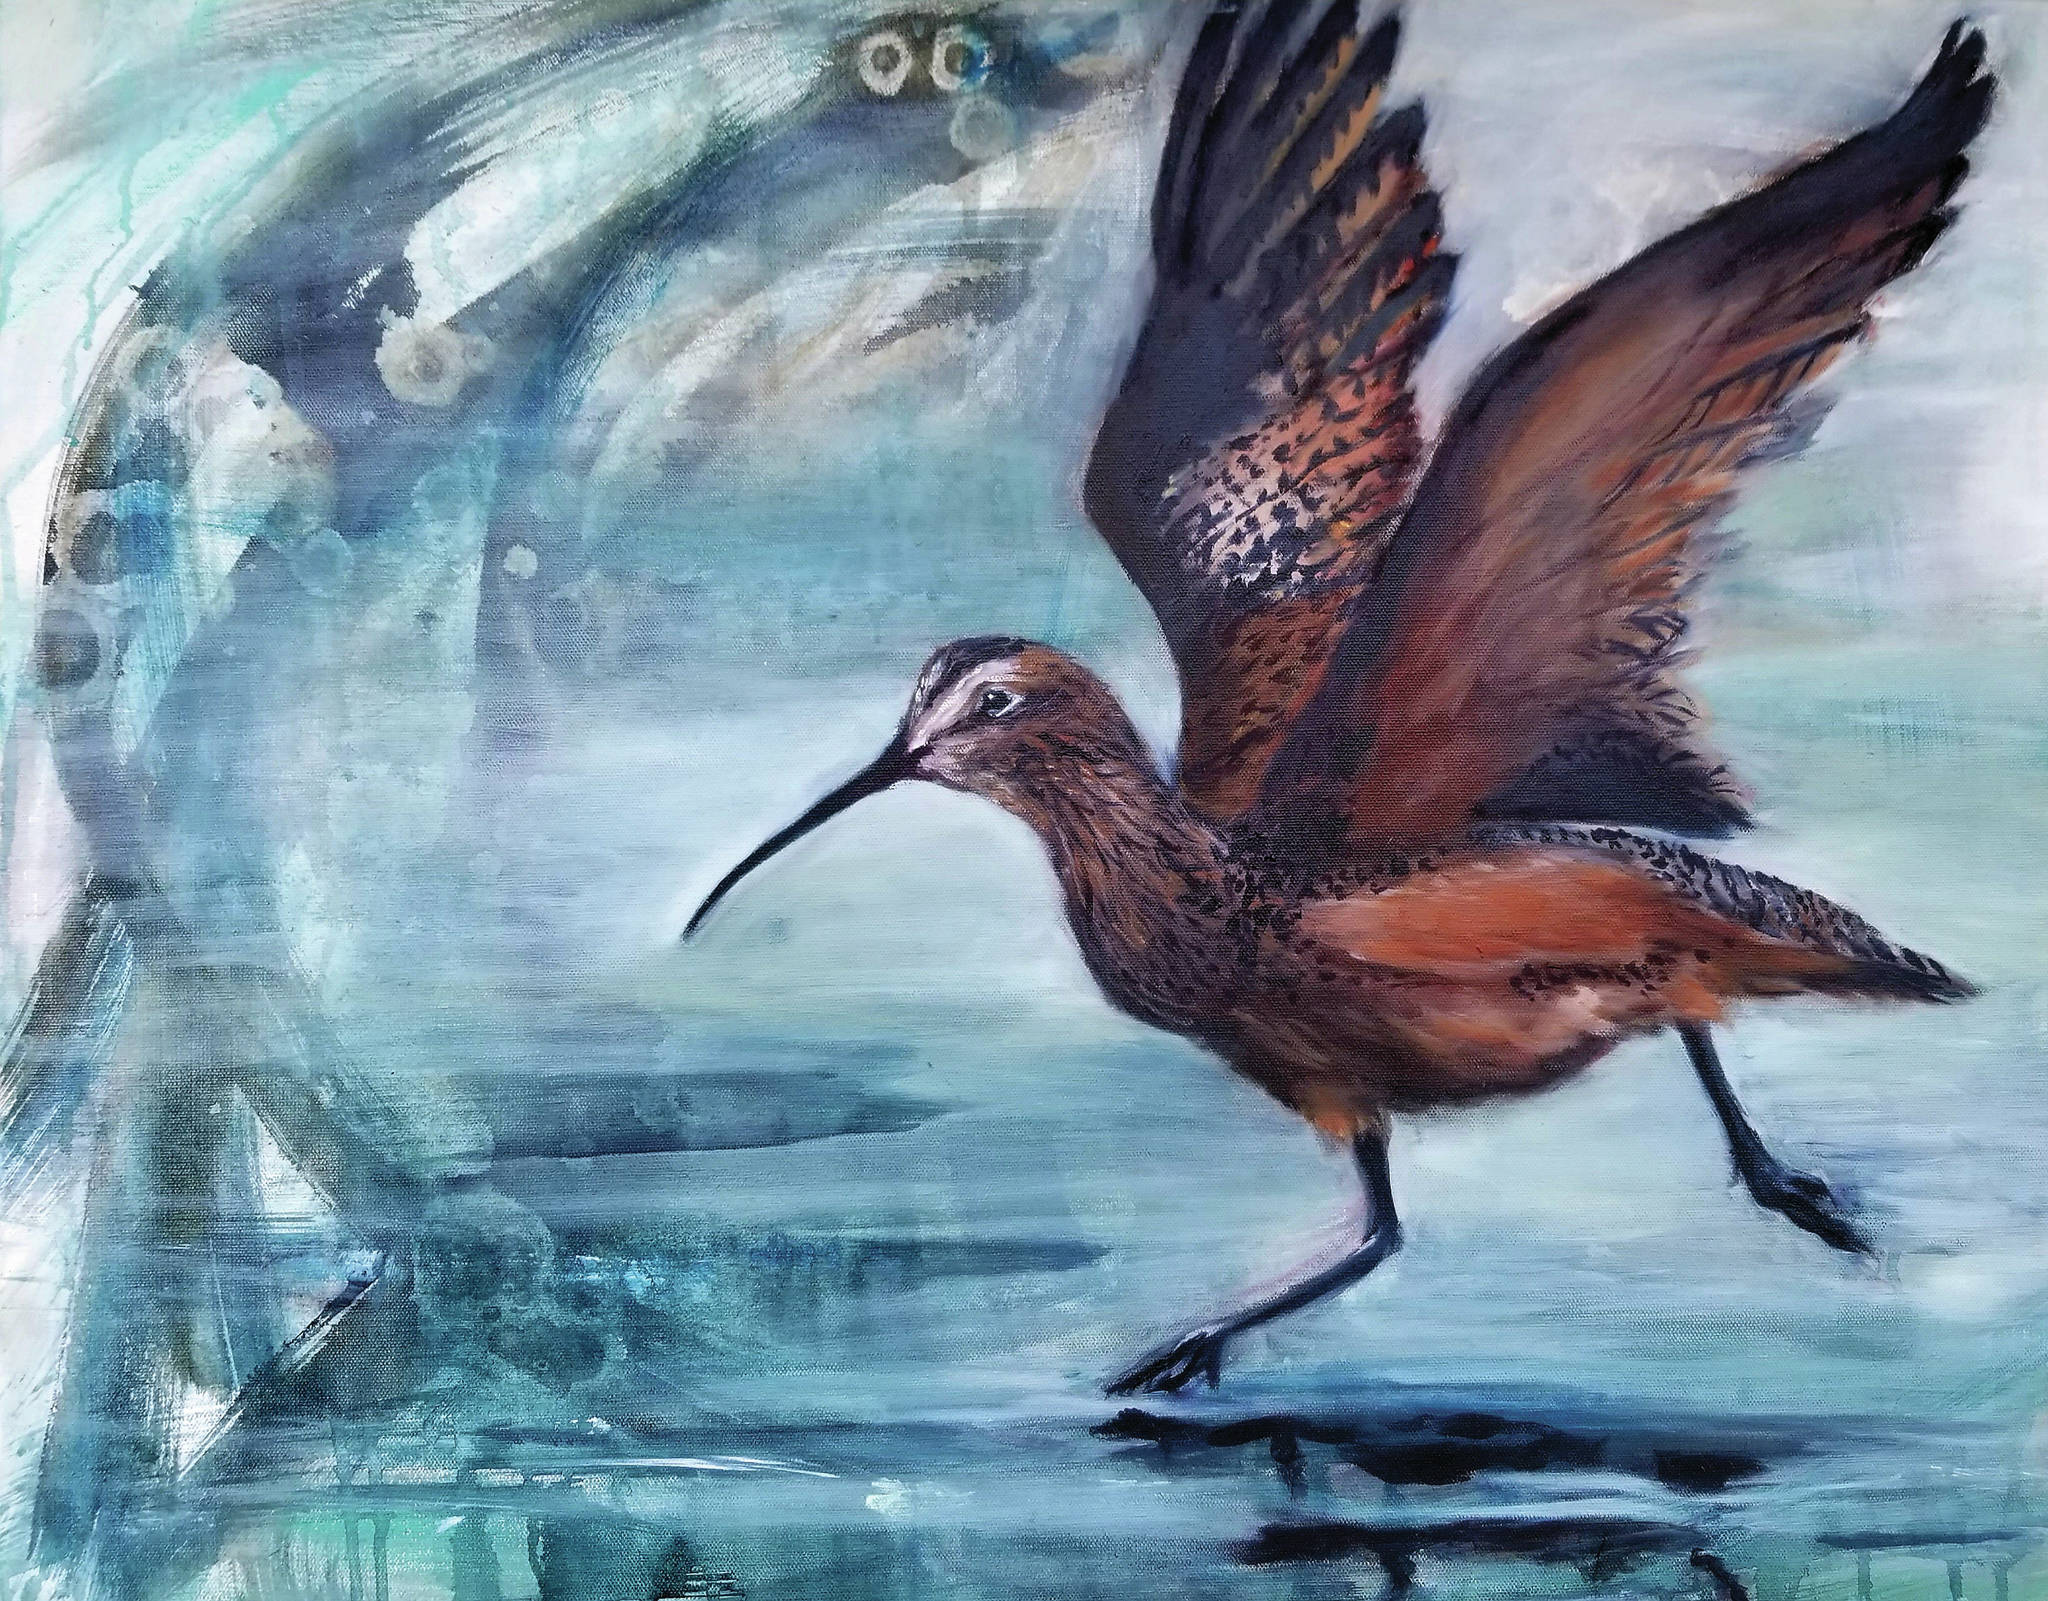 Art by Abby Ullen from a show opening Friday, Aug. 7, 2020, at Ptarmigan Arts in Homer, Alaska. (Photo courtesy Ptarmigan Arts)